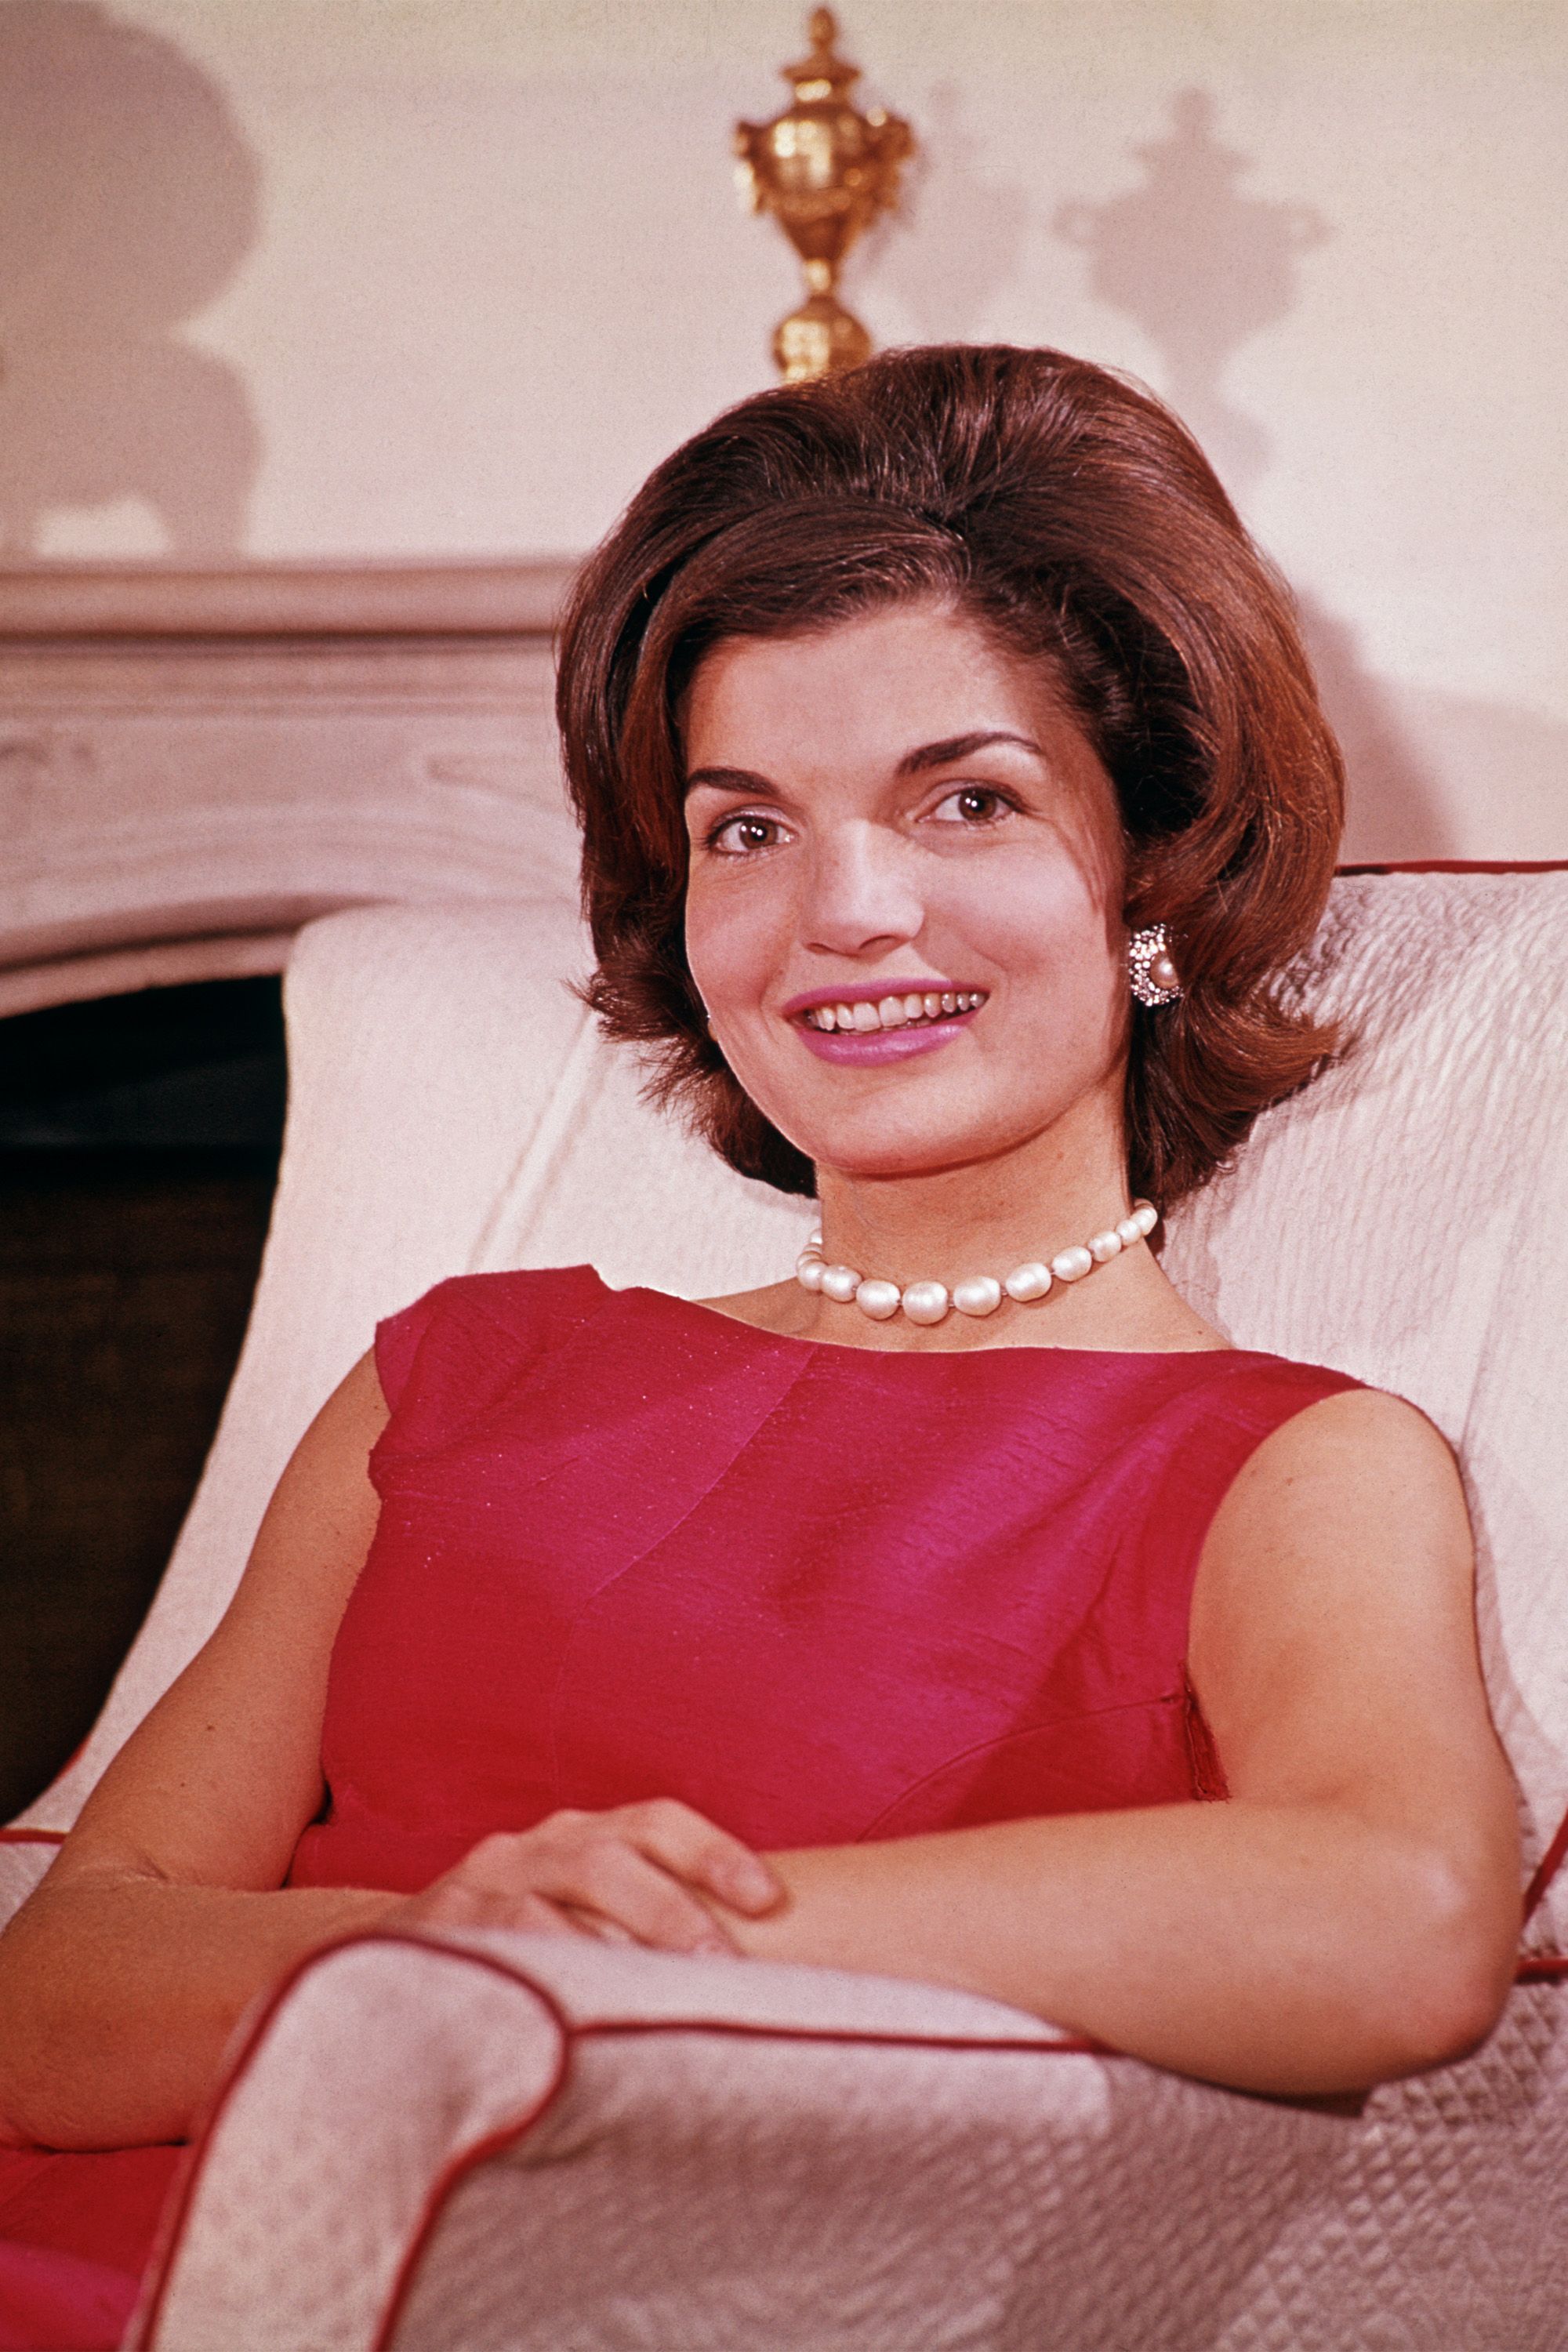 What Happened to Jackie Kennedy's Pink Suit? - Owlcation